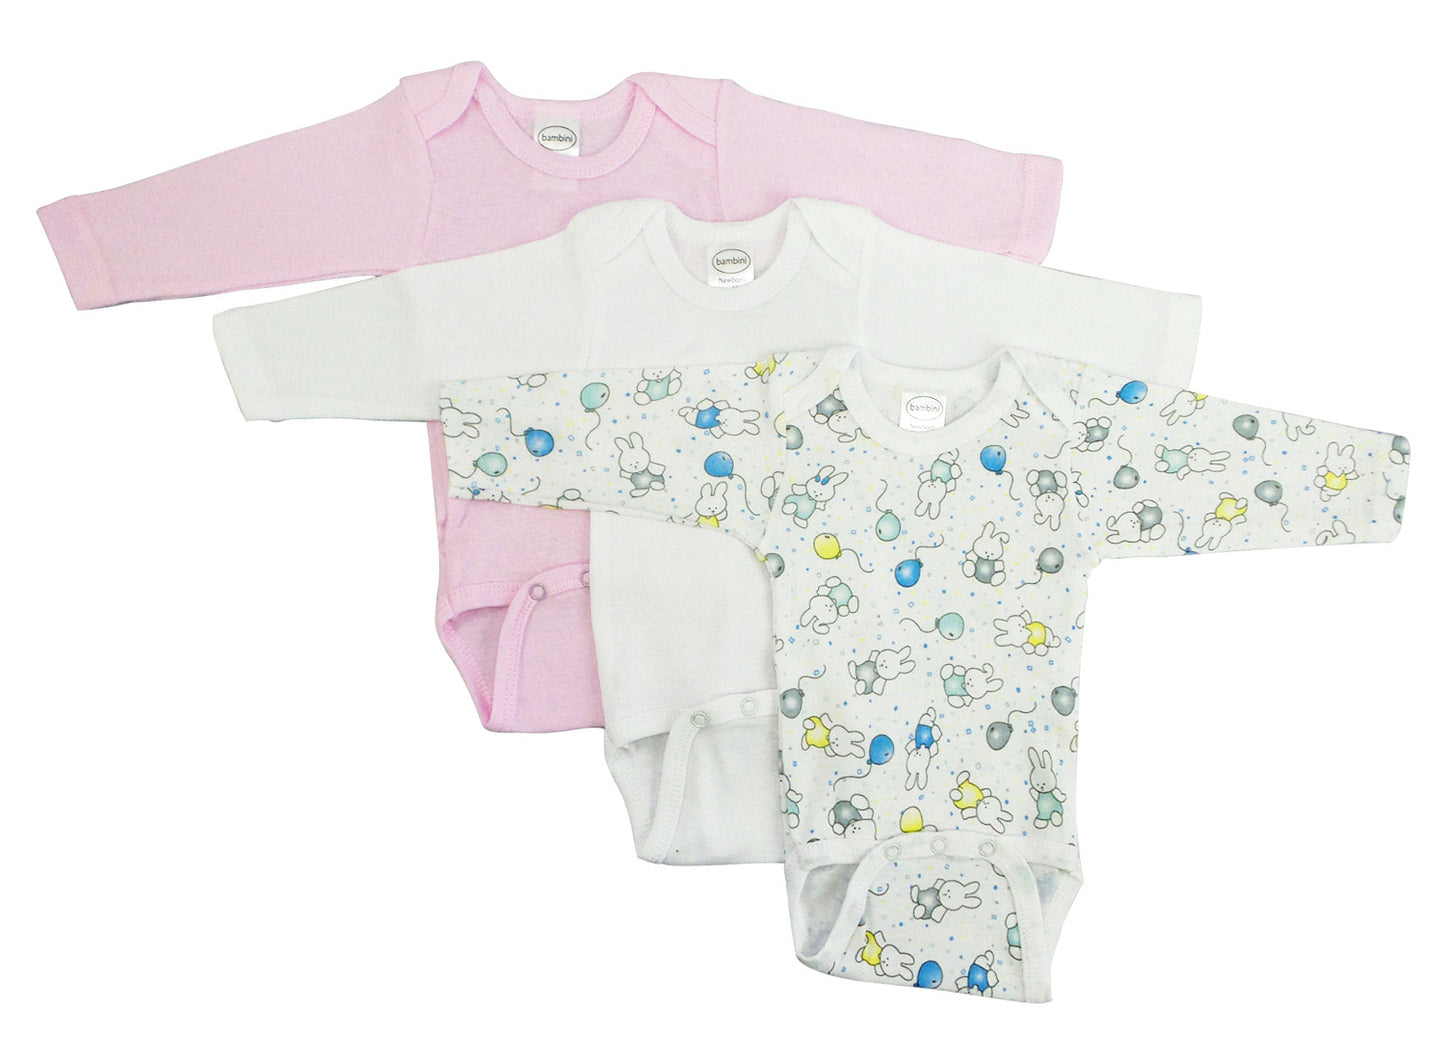 Bambini Girl's Long Sleeve Printed Onezie Variety Pack